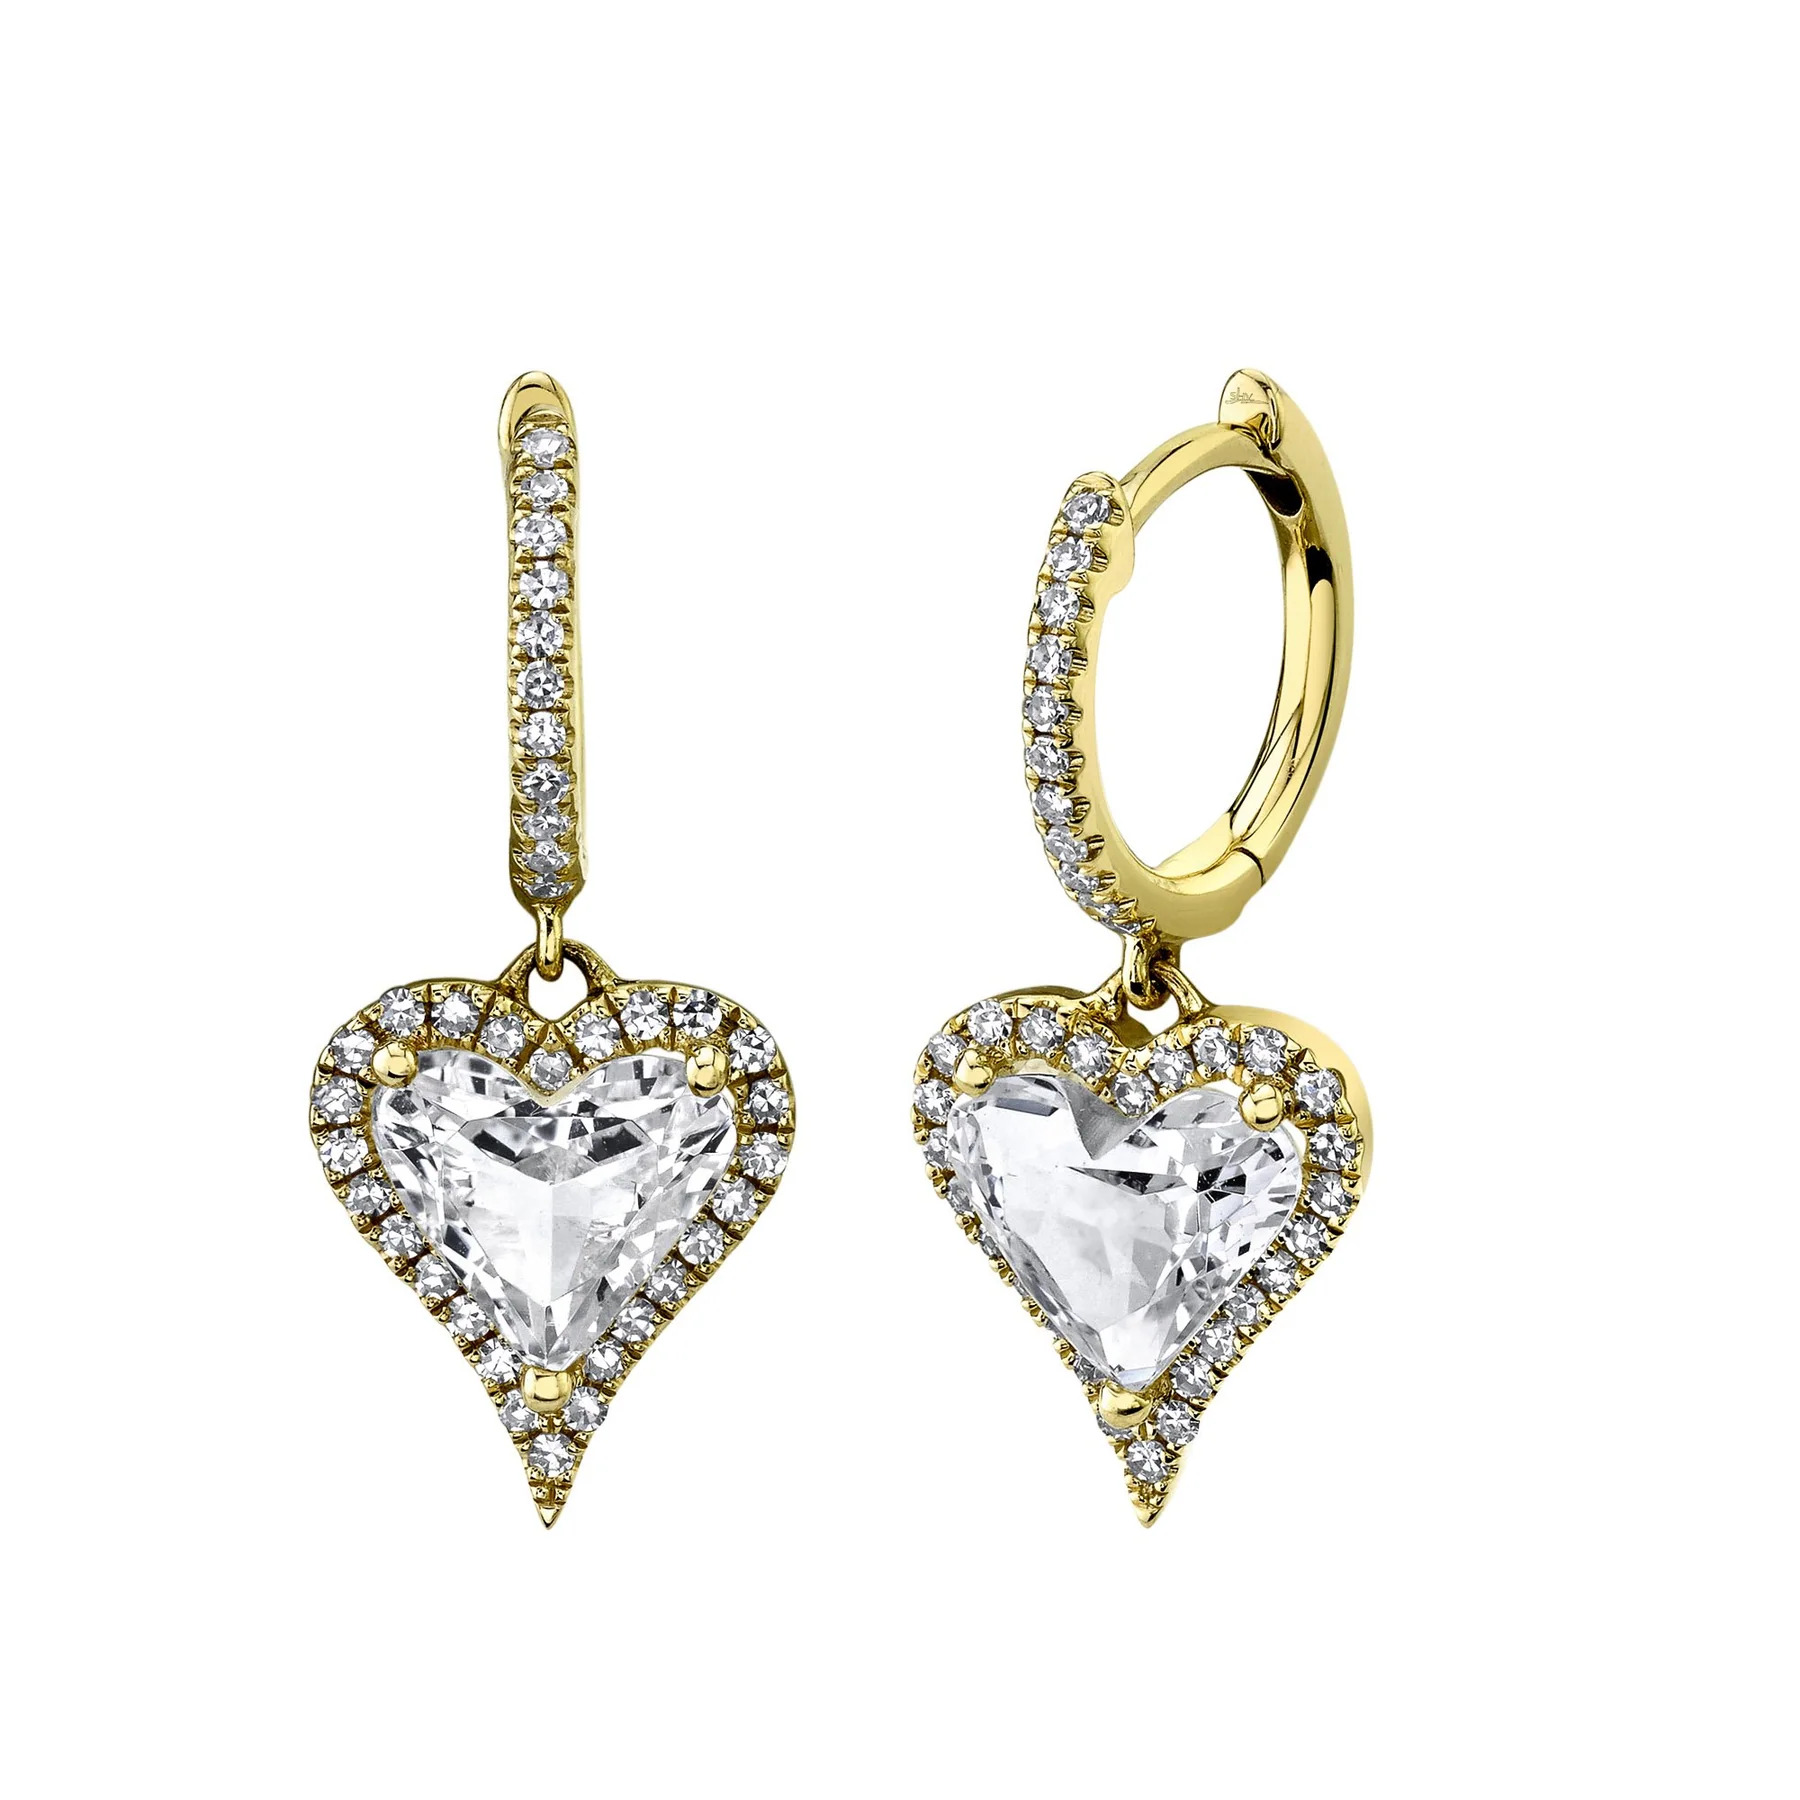 Two yellow gold earrings featuring a central heart shape with a white topaz gemstone and surrounded by diamonds. The heart-shaped pendant hangs from the earring band with diamonds.